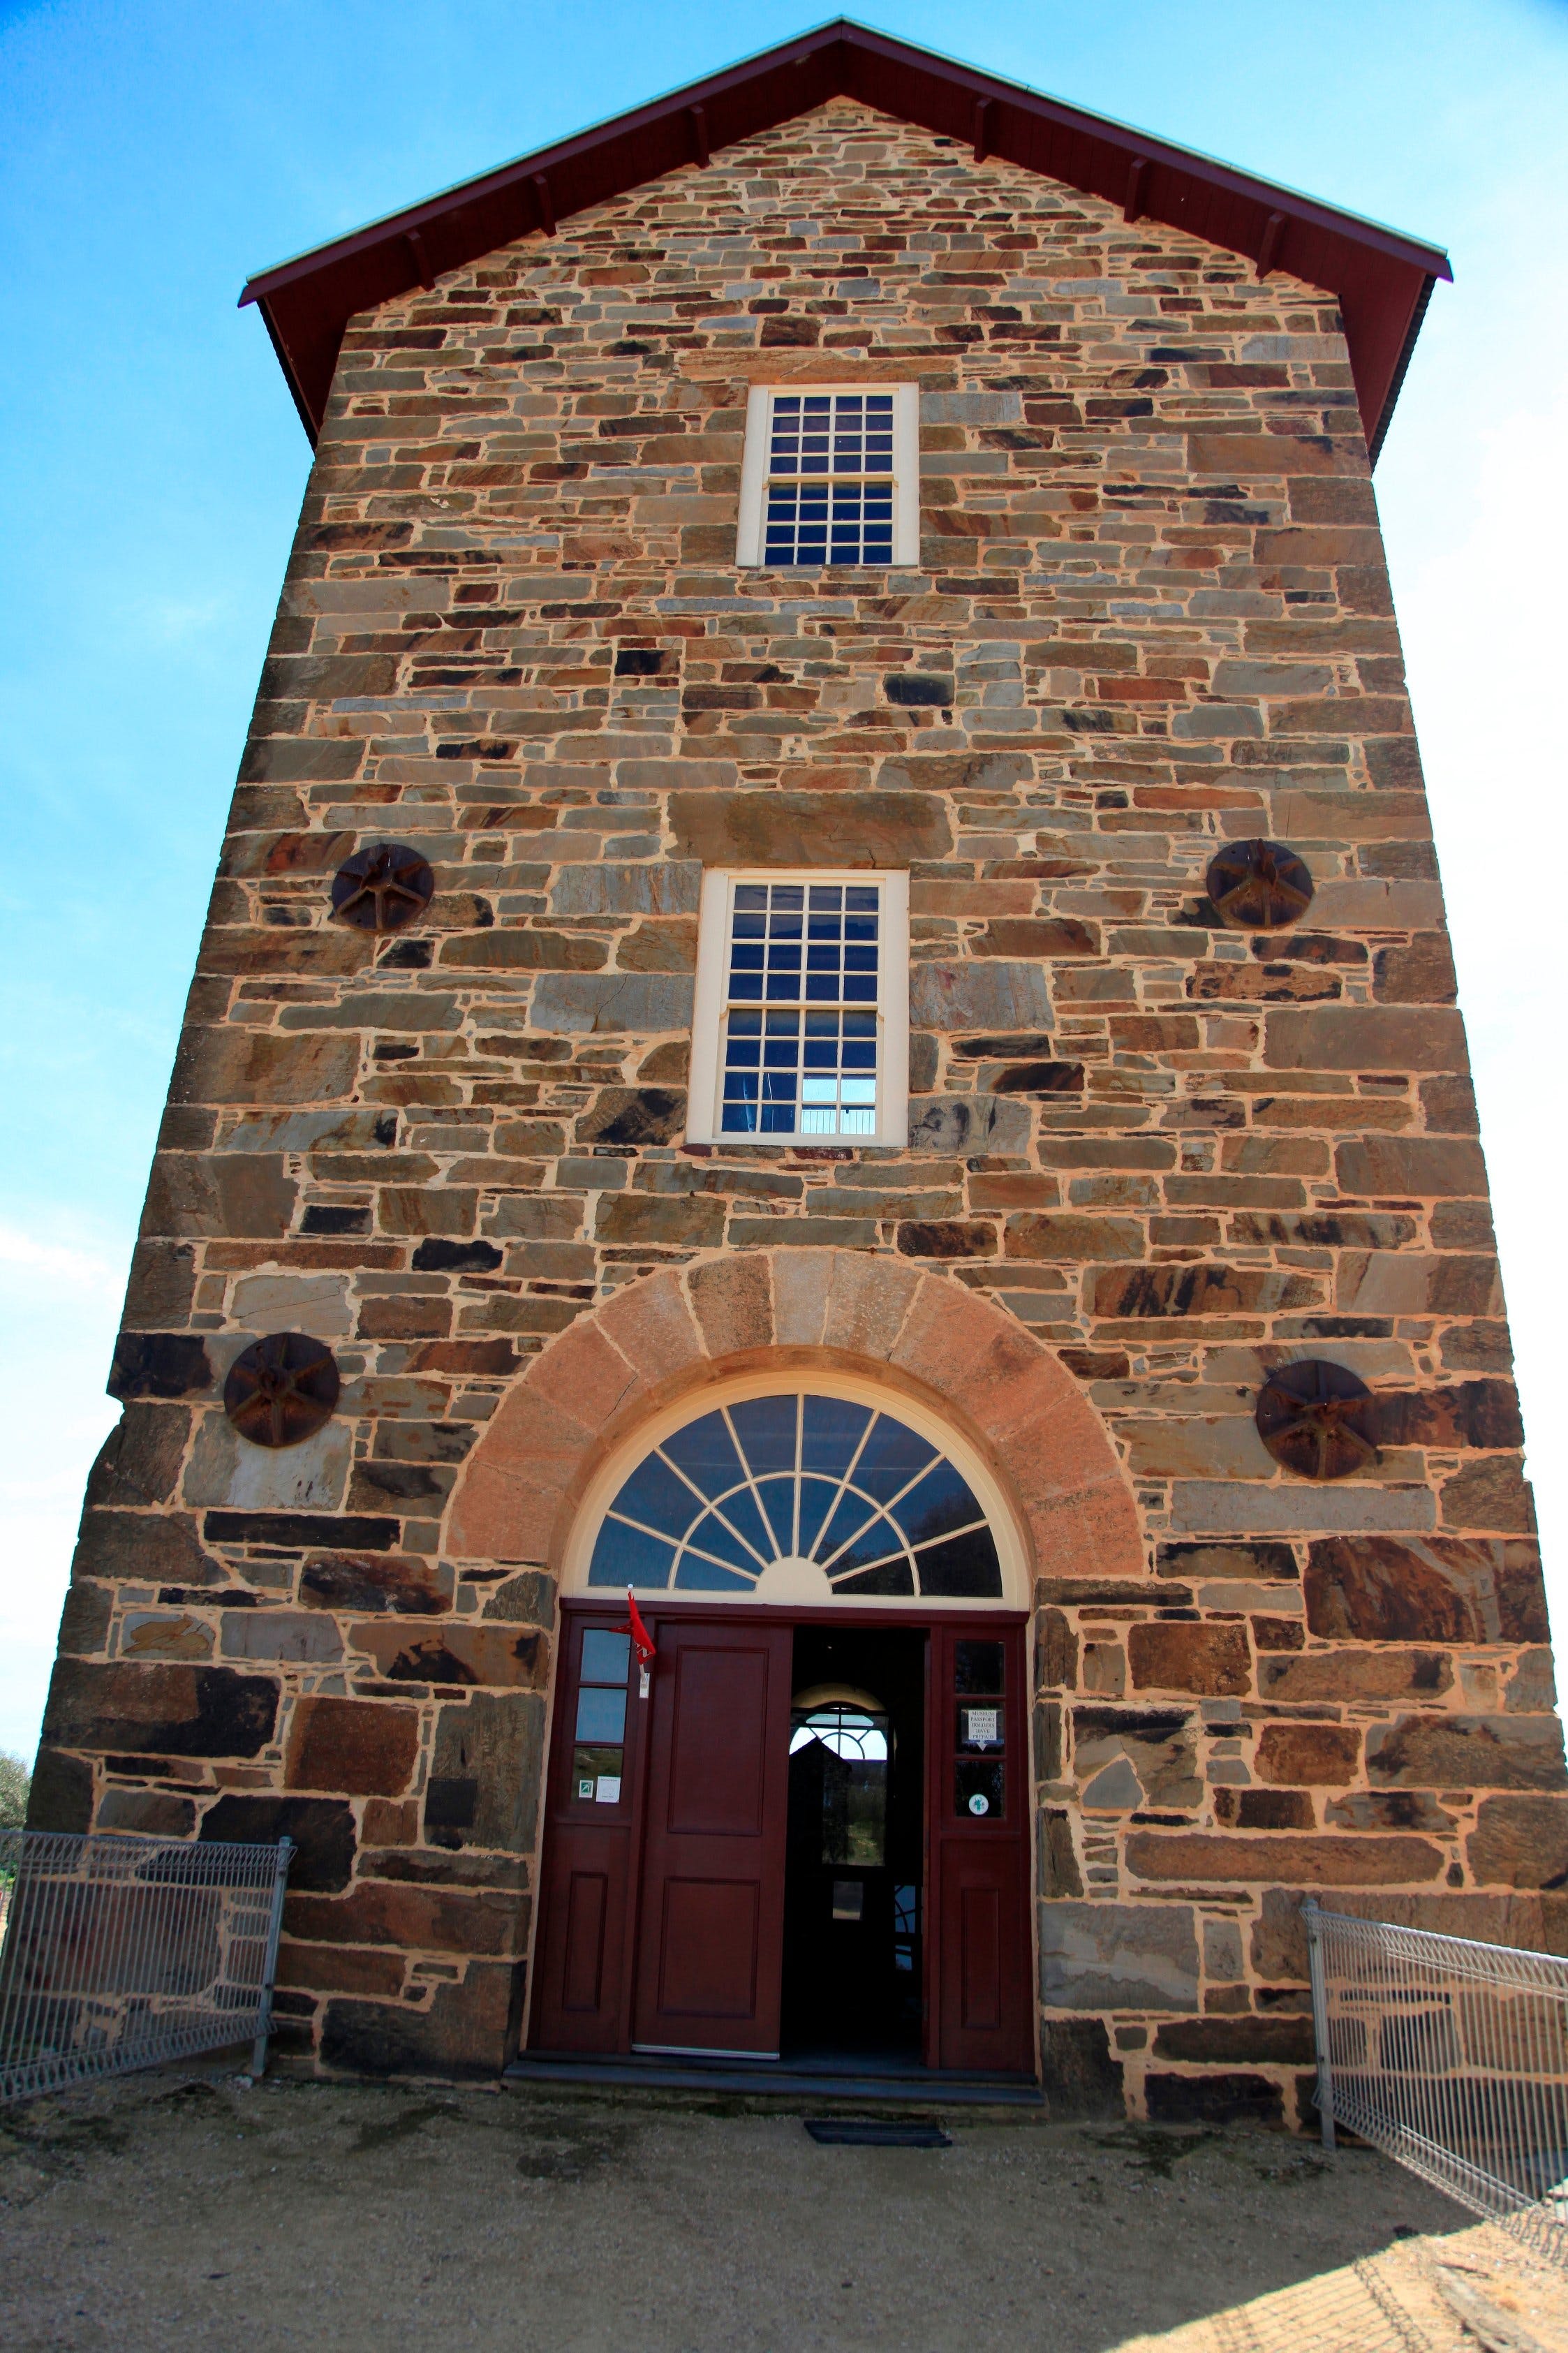 Morphetts Enginehouse - Find Attractions